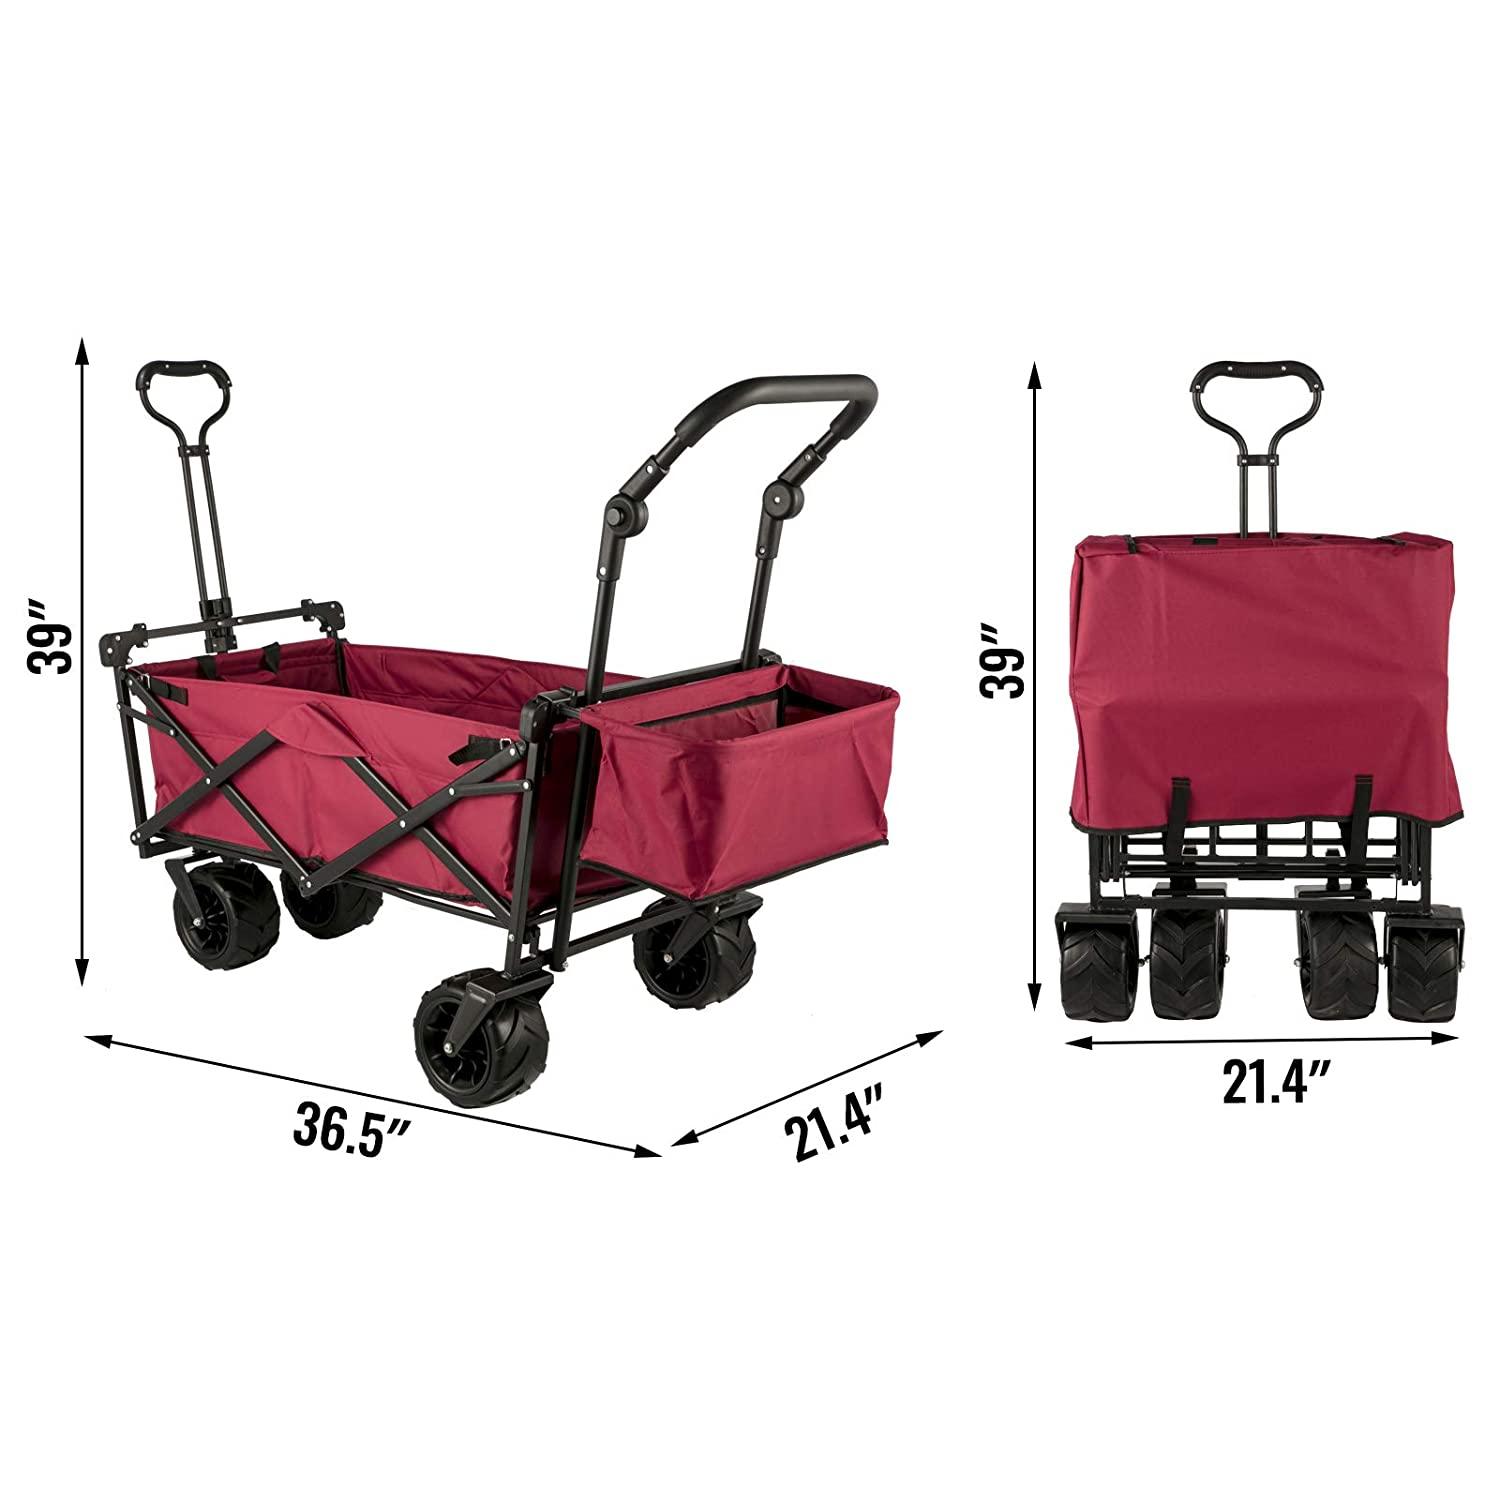 Foldable Handcart 92.7 x 54.3 x 98.5 cm, Foldable Handcart 100 kg, Red Handcart Roof Pneumatic Tires 600D Oxford Polyester, Foldable Handcart with 2 Velcro Straps, for Outdoor Activities - Sterilamo